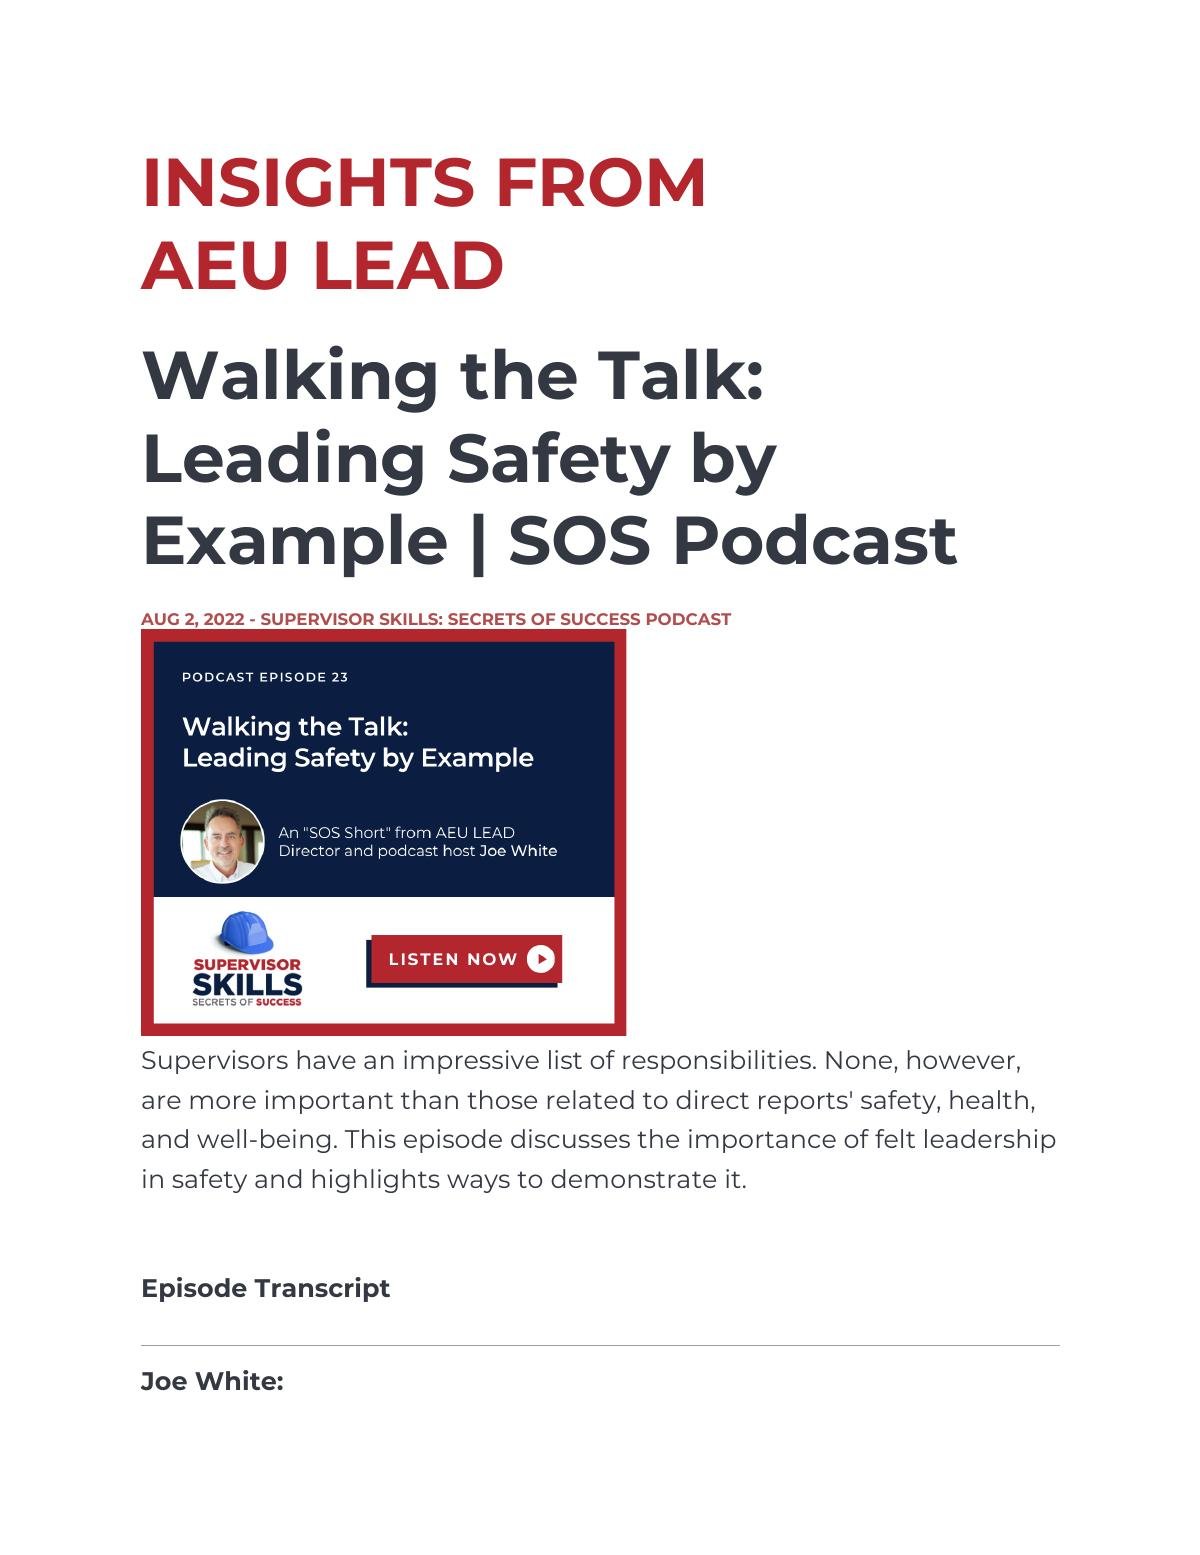 Walking the Talk: Leading Safety by Example | SOS Podcast